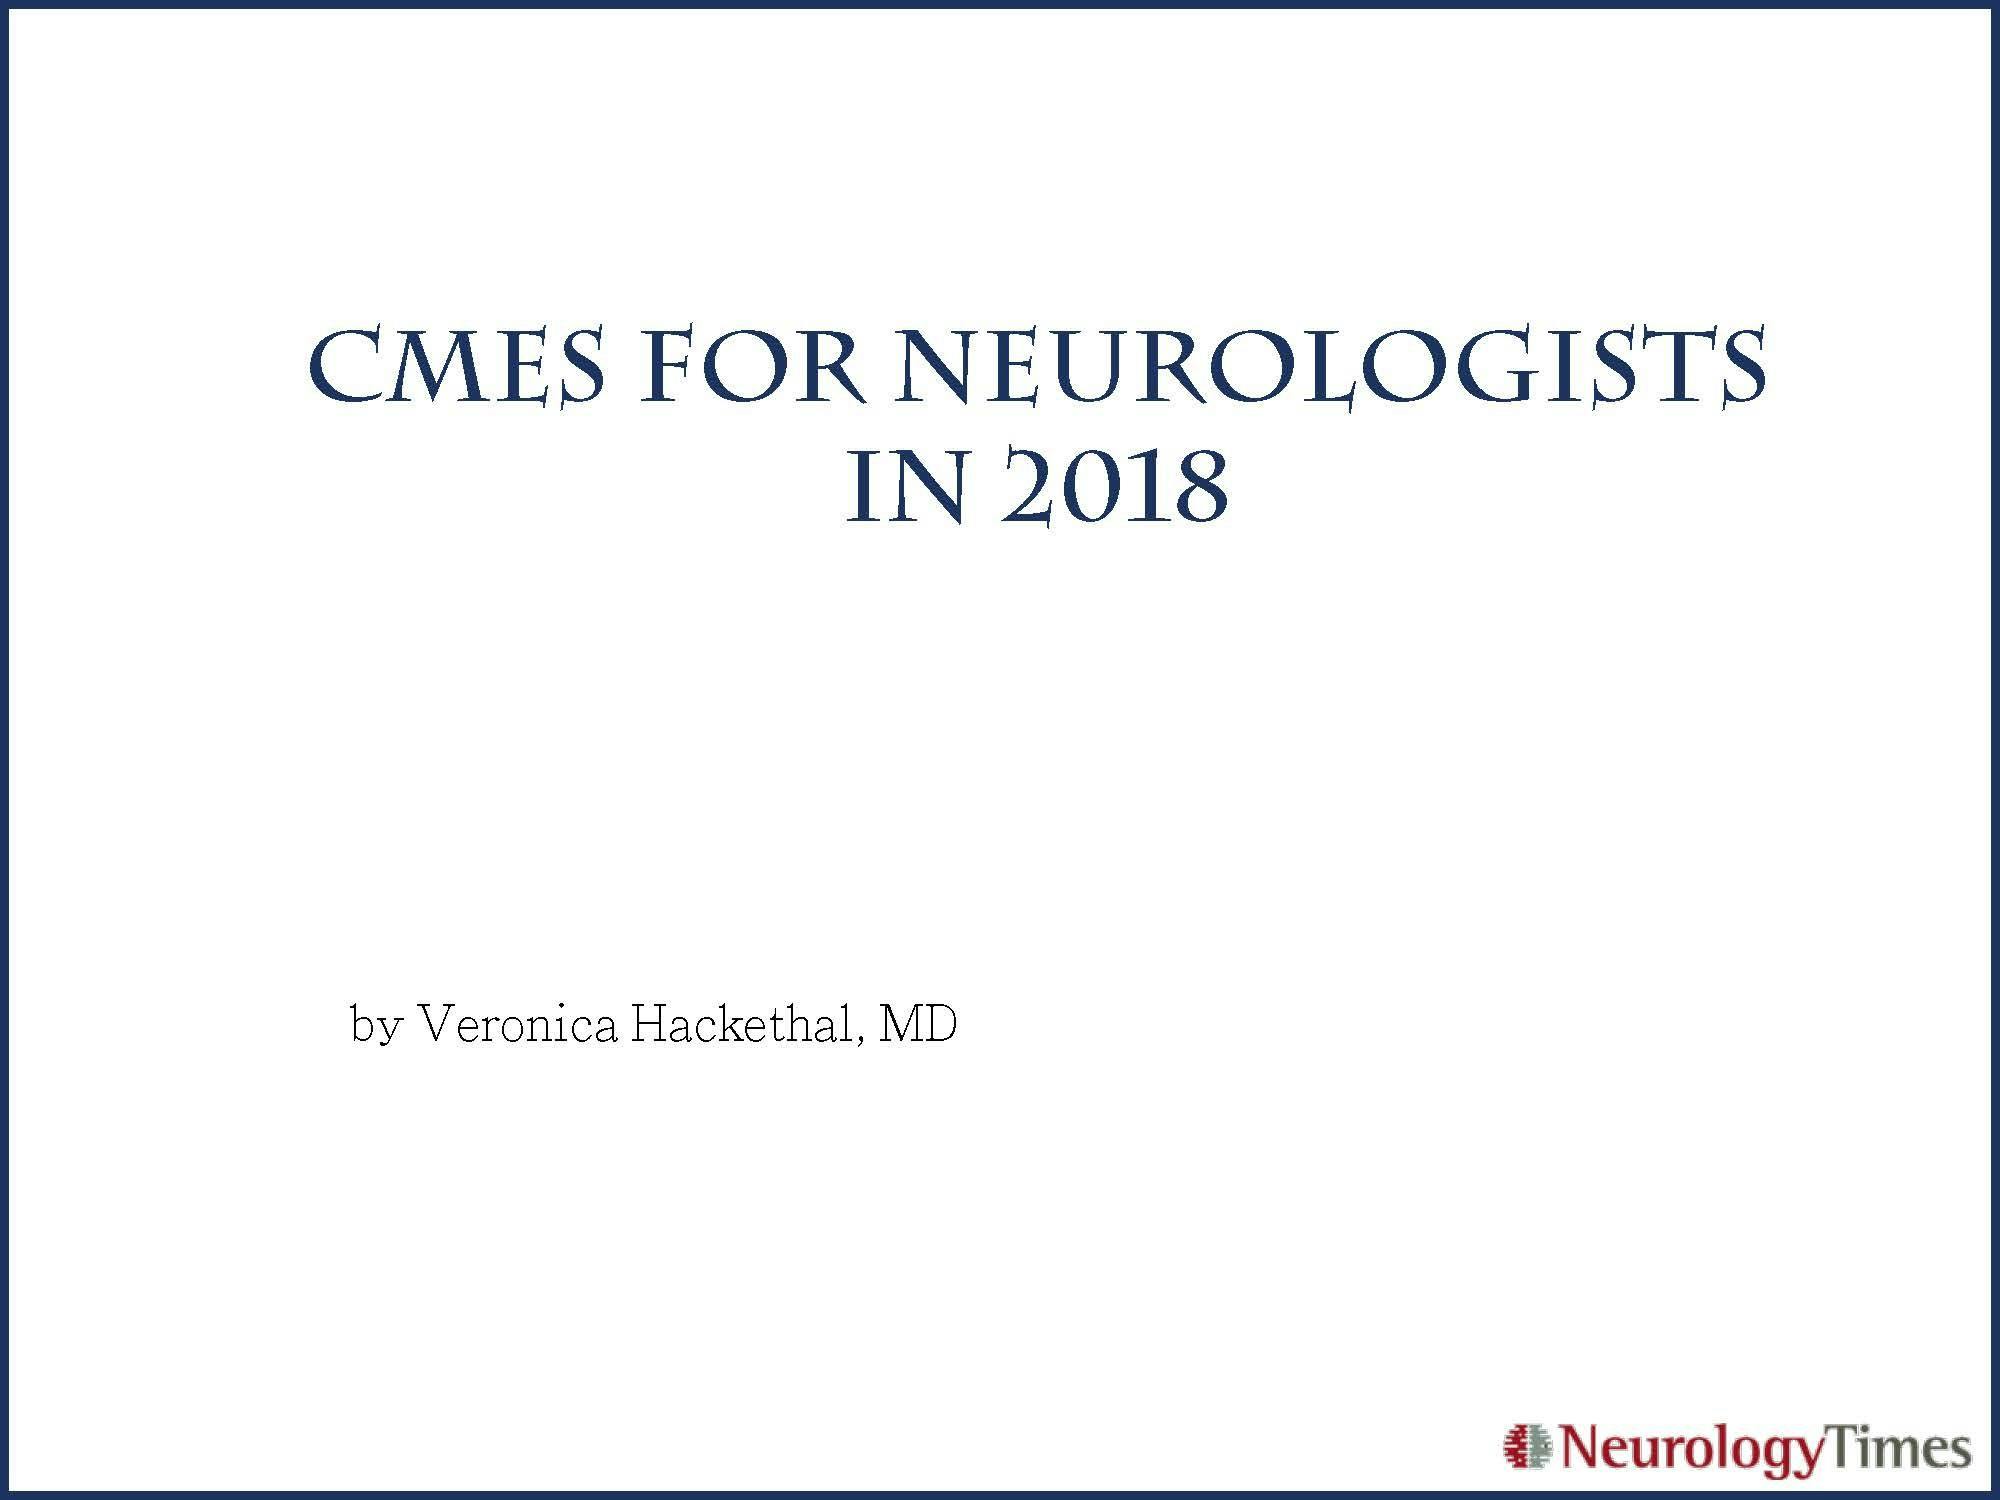 CMEs for Neurologists in 2018